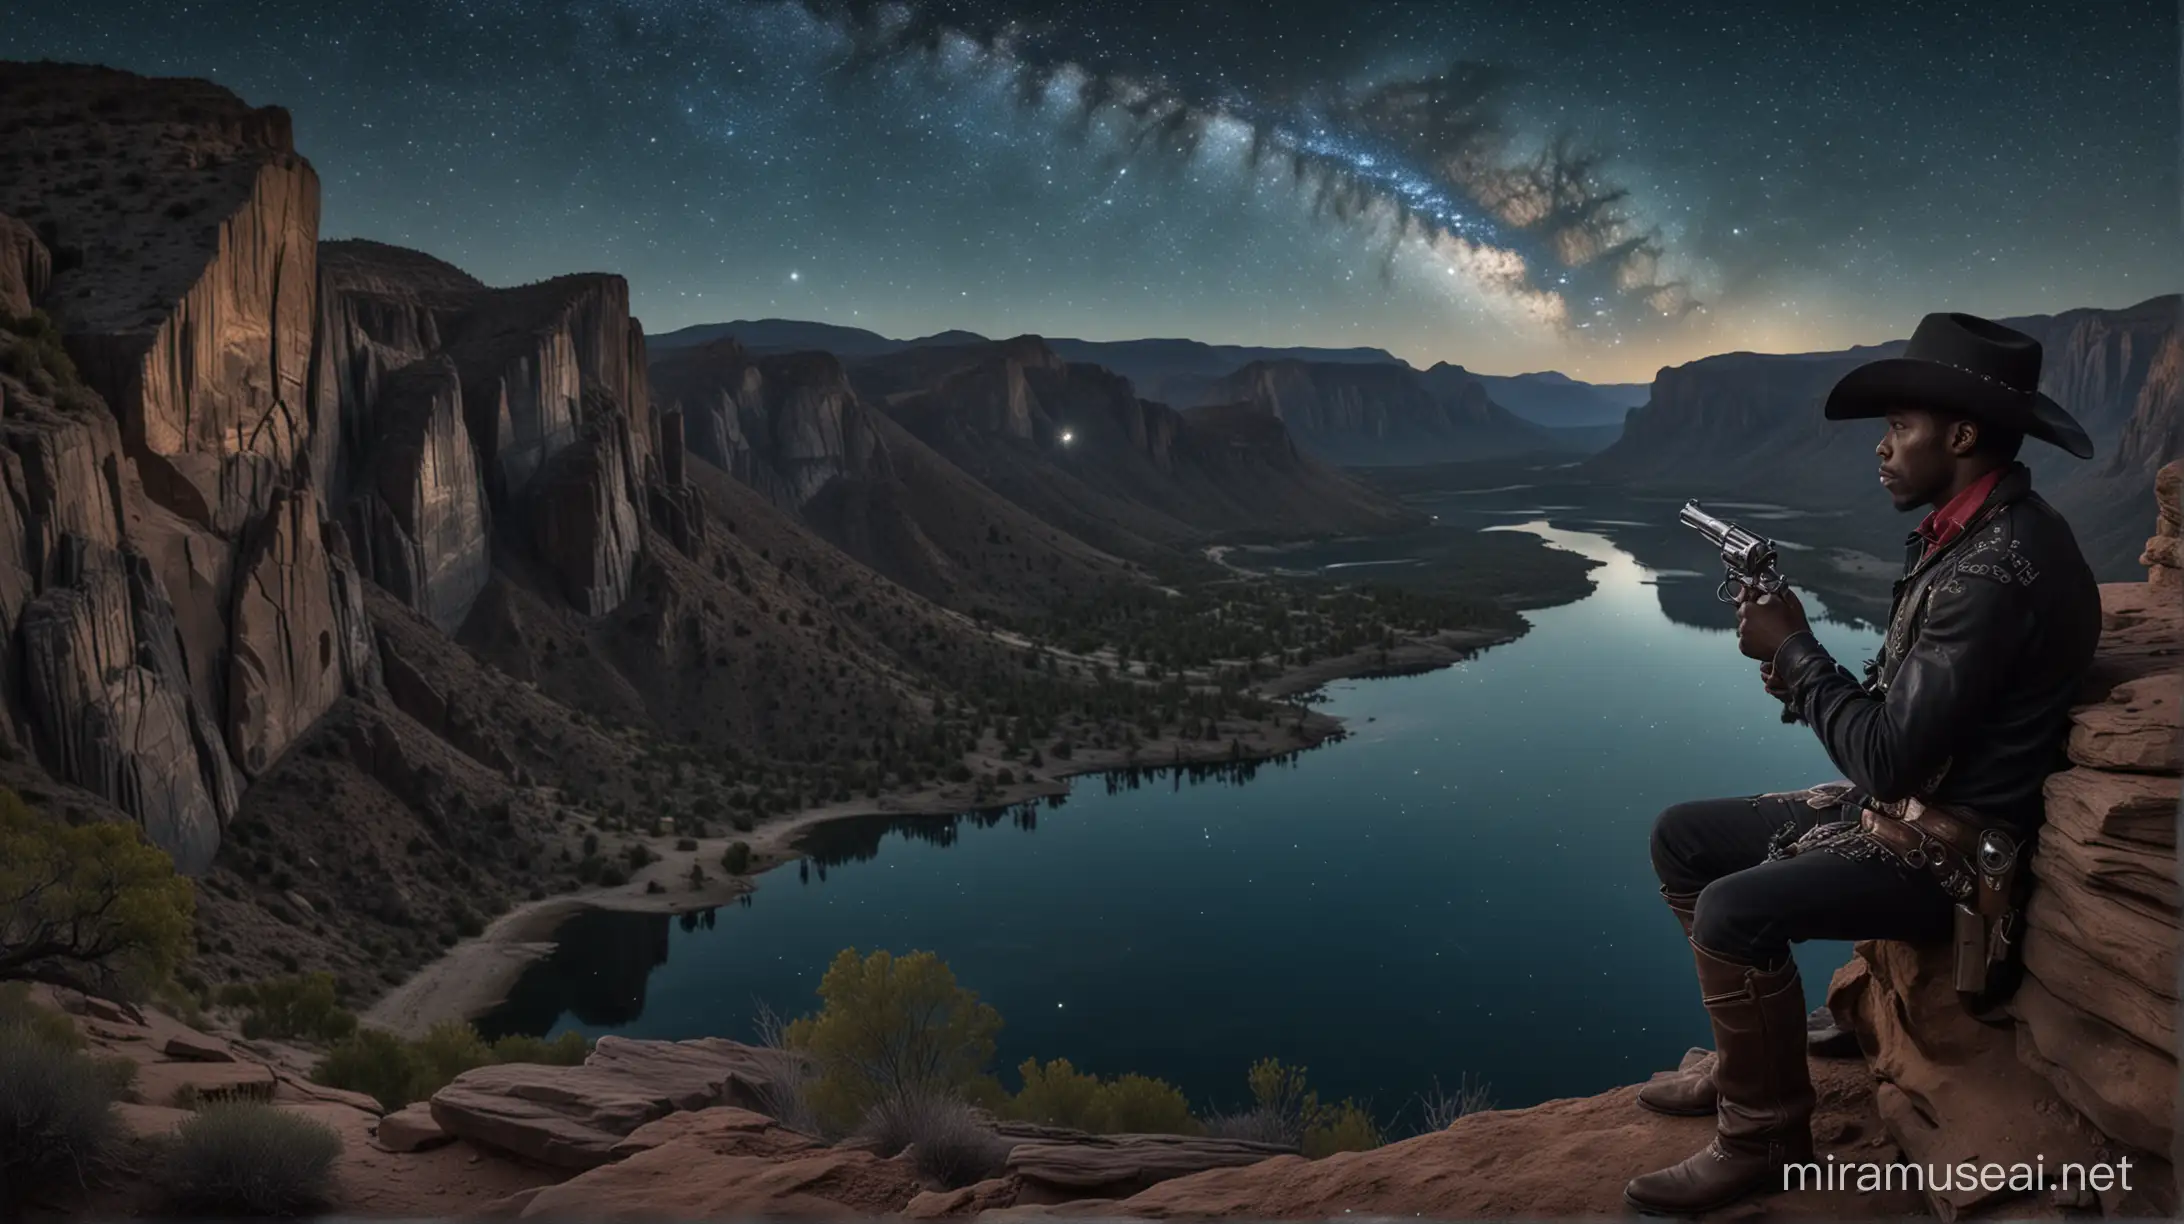 Black Cowboy sitting on the right side of cliff with a revolver in his left hand with a beautiful lake below and a starry night sky with other planets visible